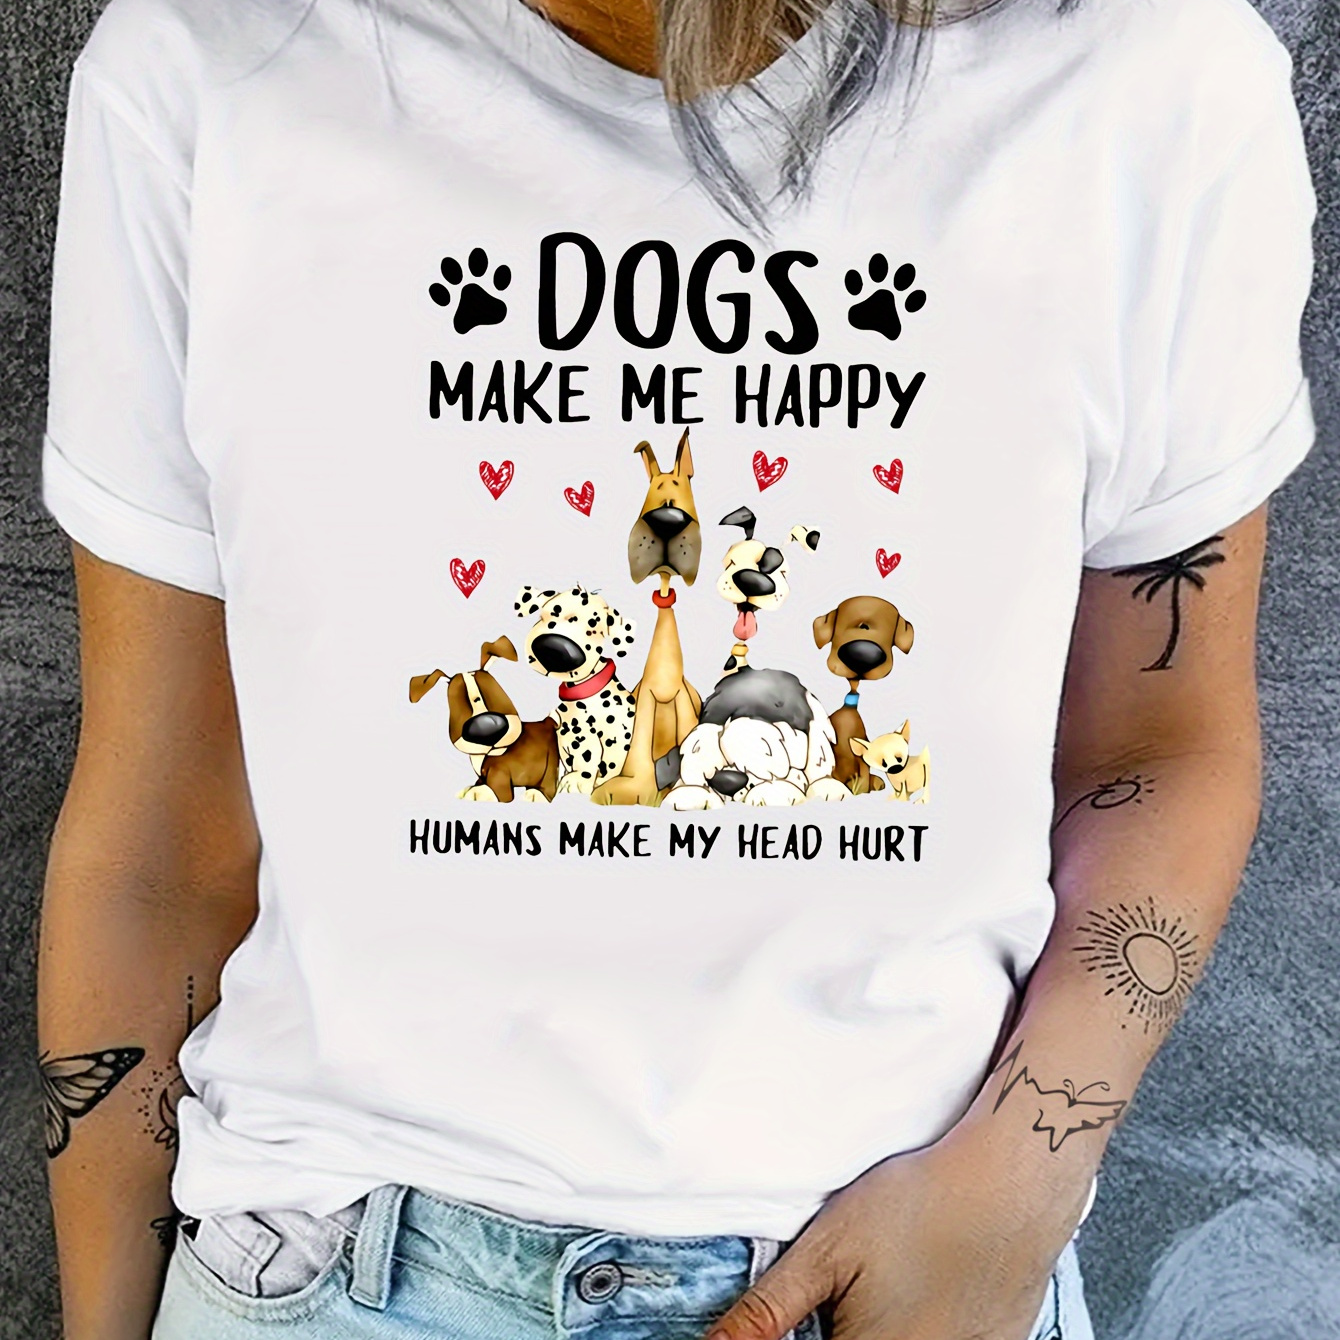 

Dog Print T-shirt, Short Sleeve Crew Neck Casual Top For Summer & Spring, Women's Clothing